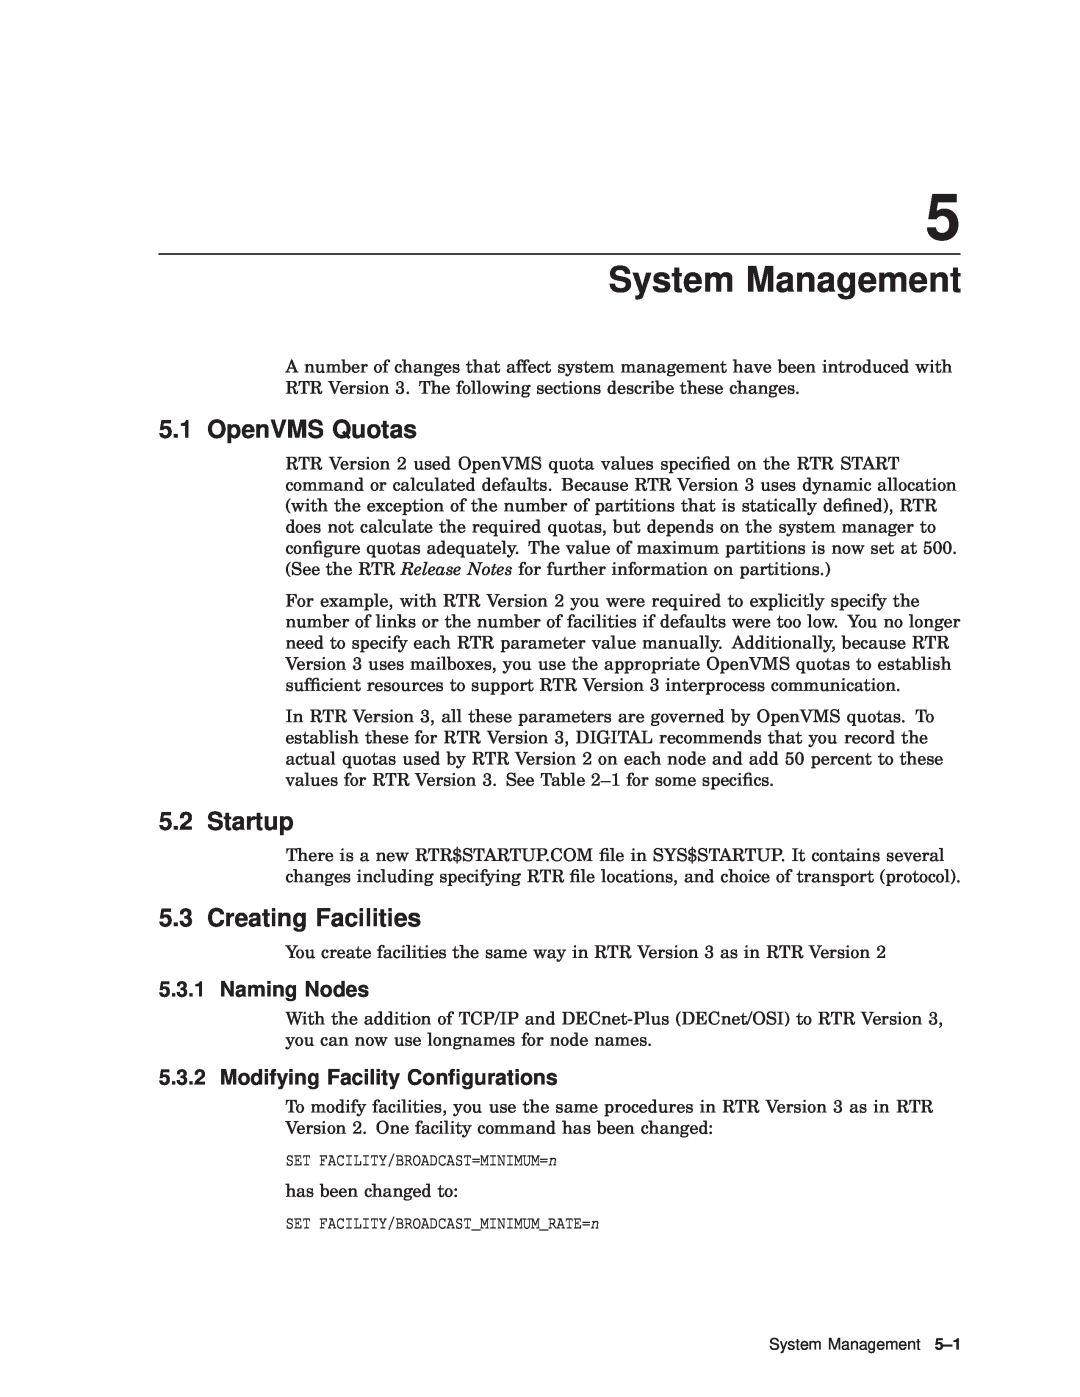 Compaq AAR-88LB-TE manual System Management, OpenVMS Quotas, Startup, Creating Facilities, Naming Nodes 